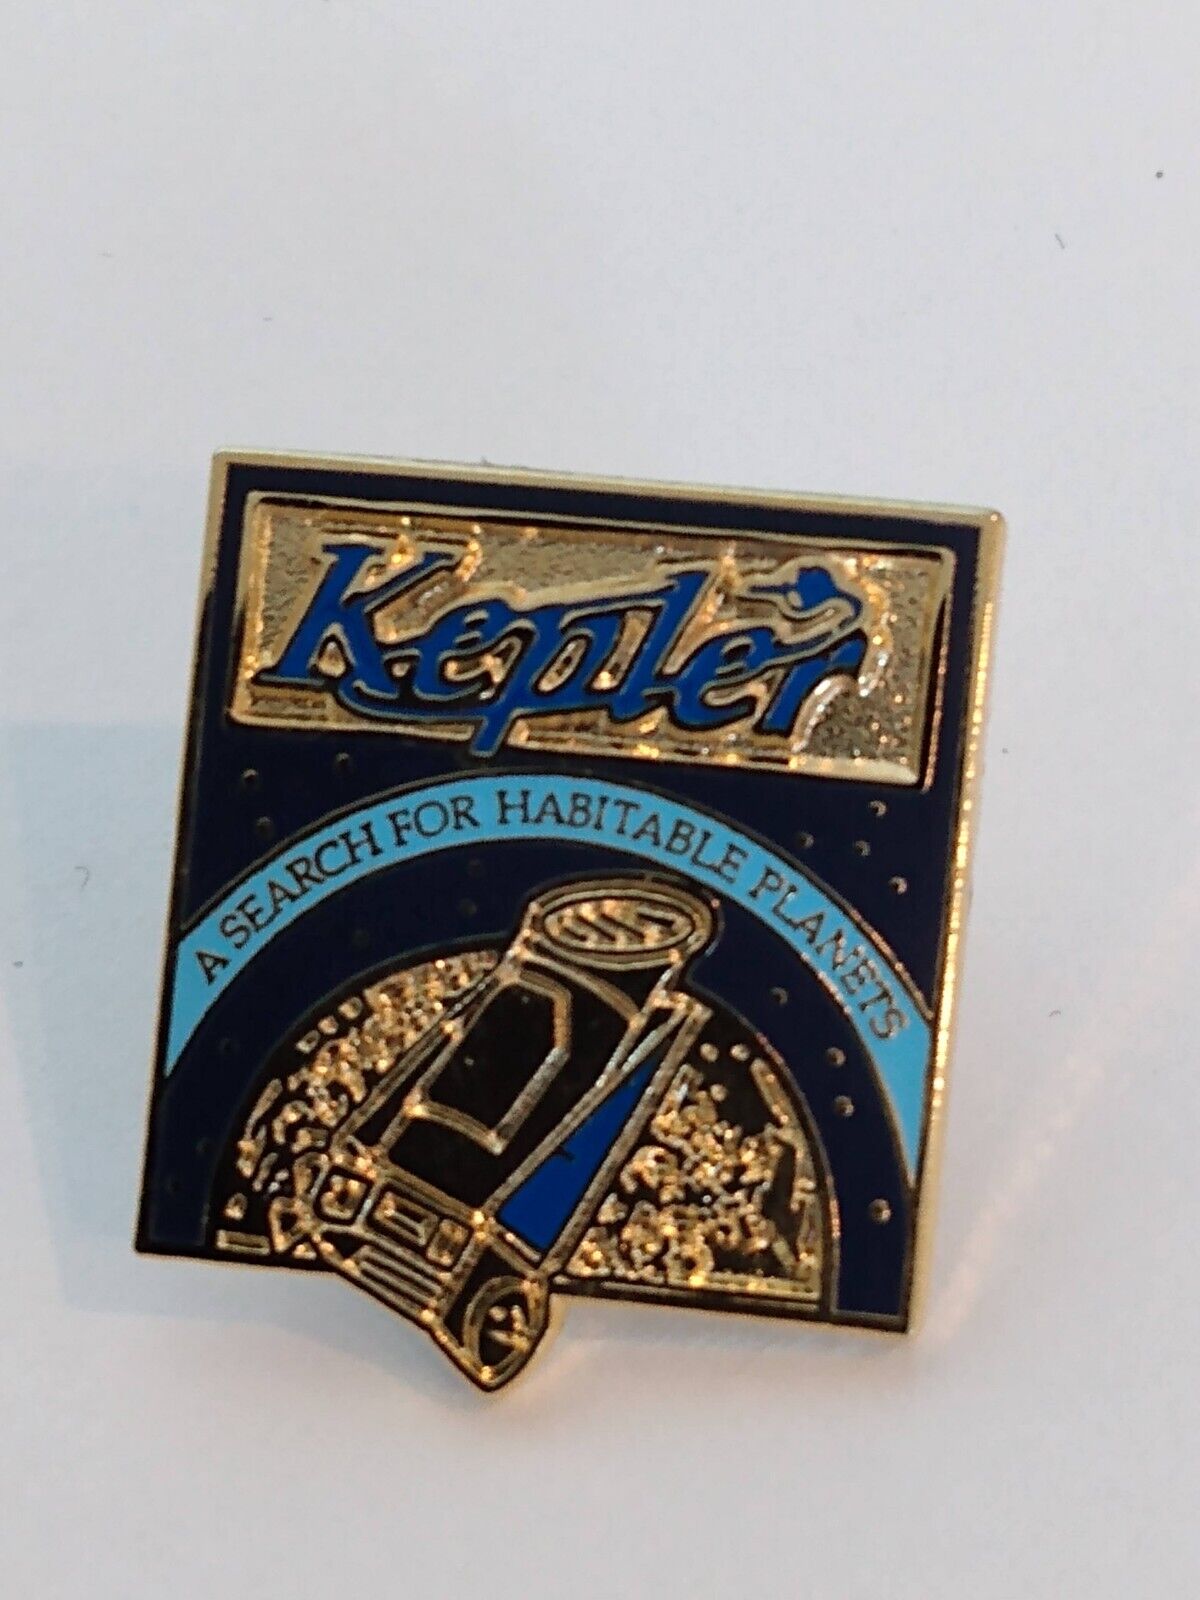 Kepler A Search for Habitable Planets Lapel Pin